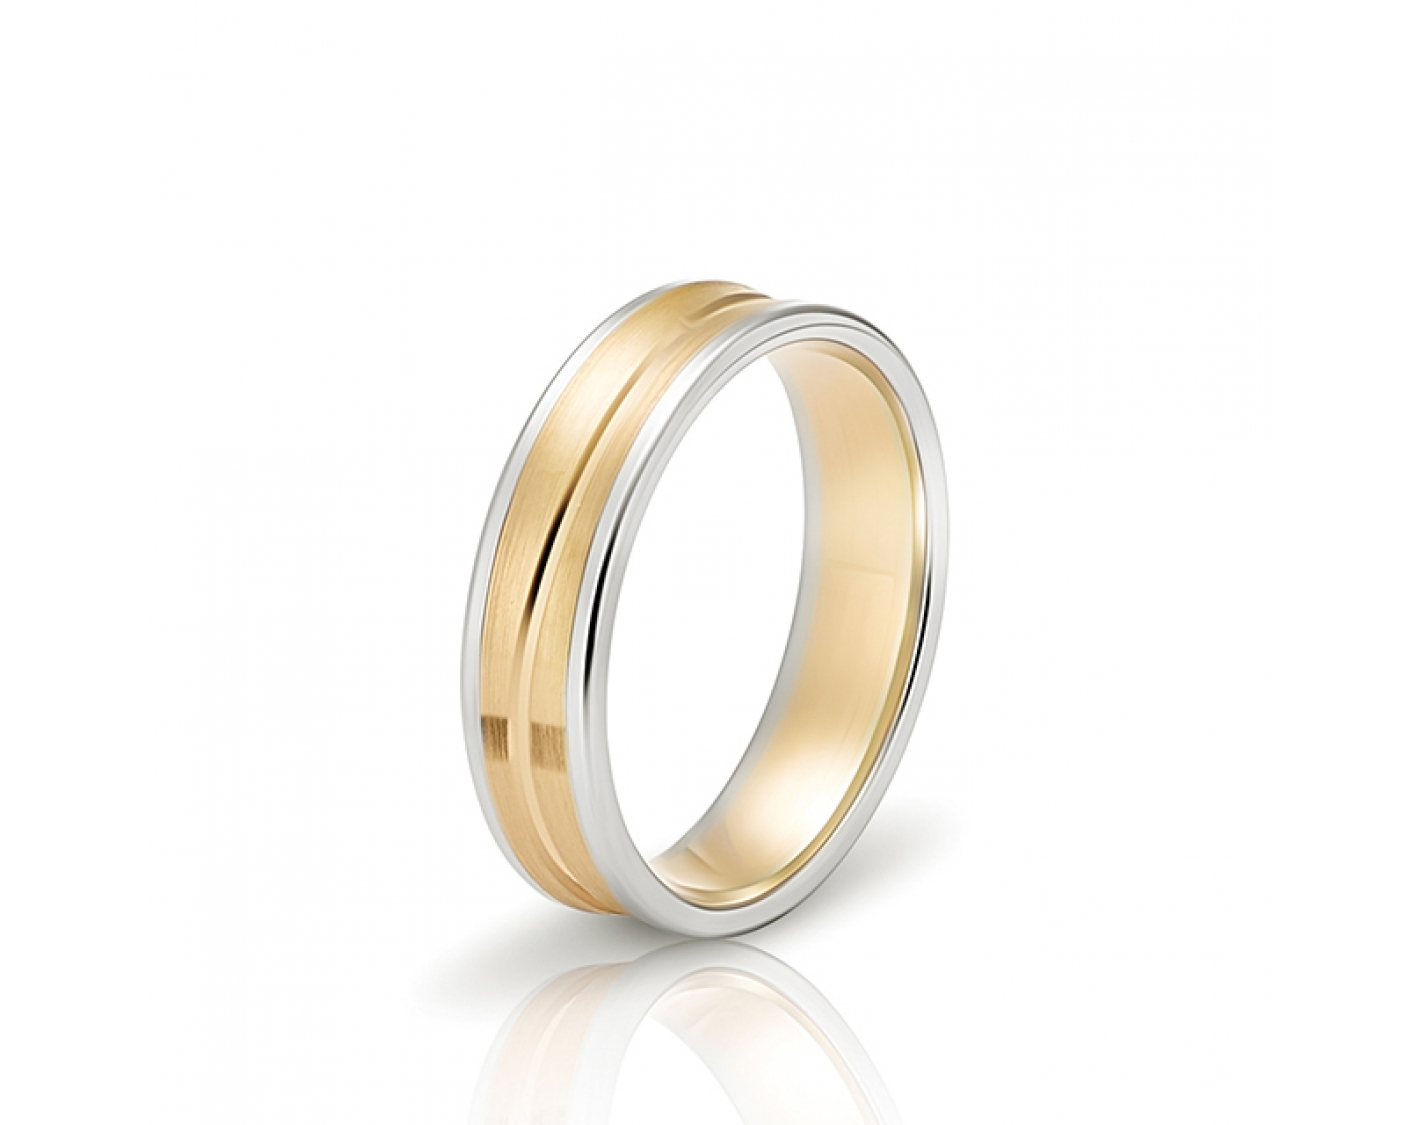 dual-tone 5,5mm two-toned* wedding band